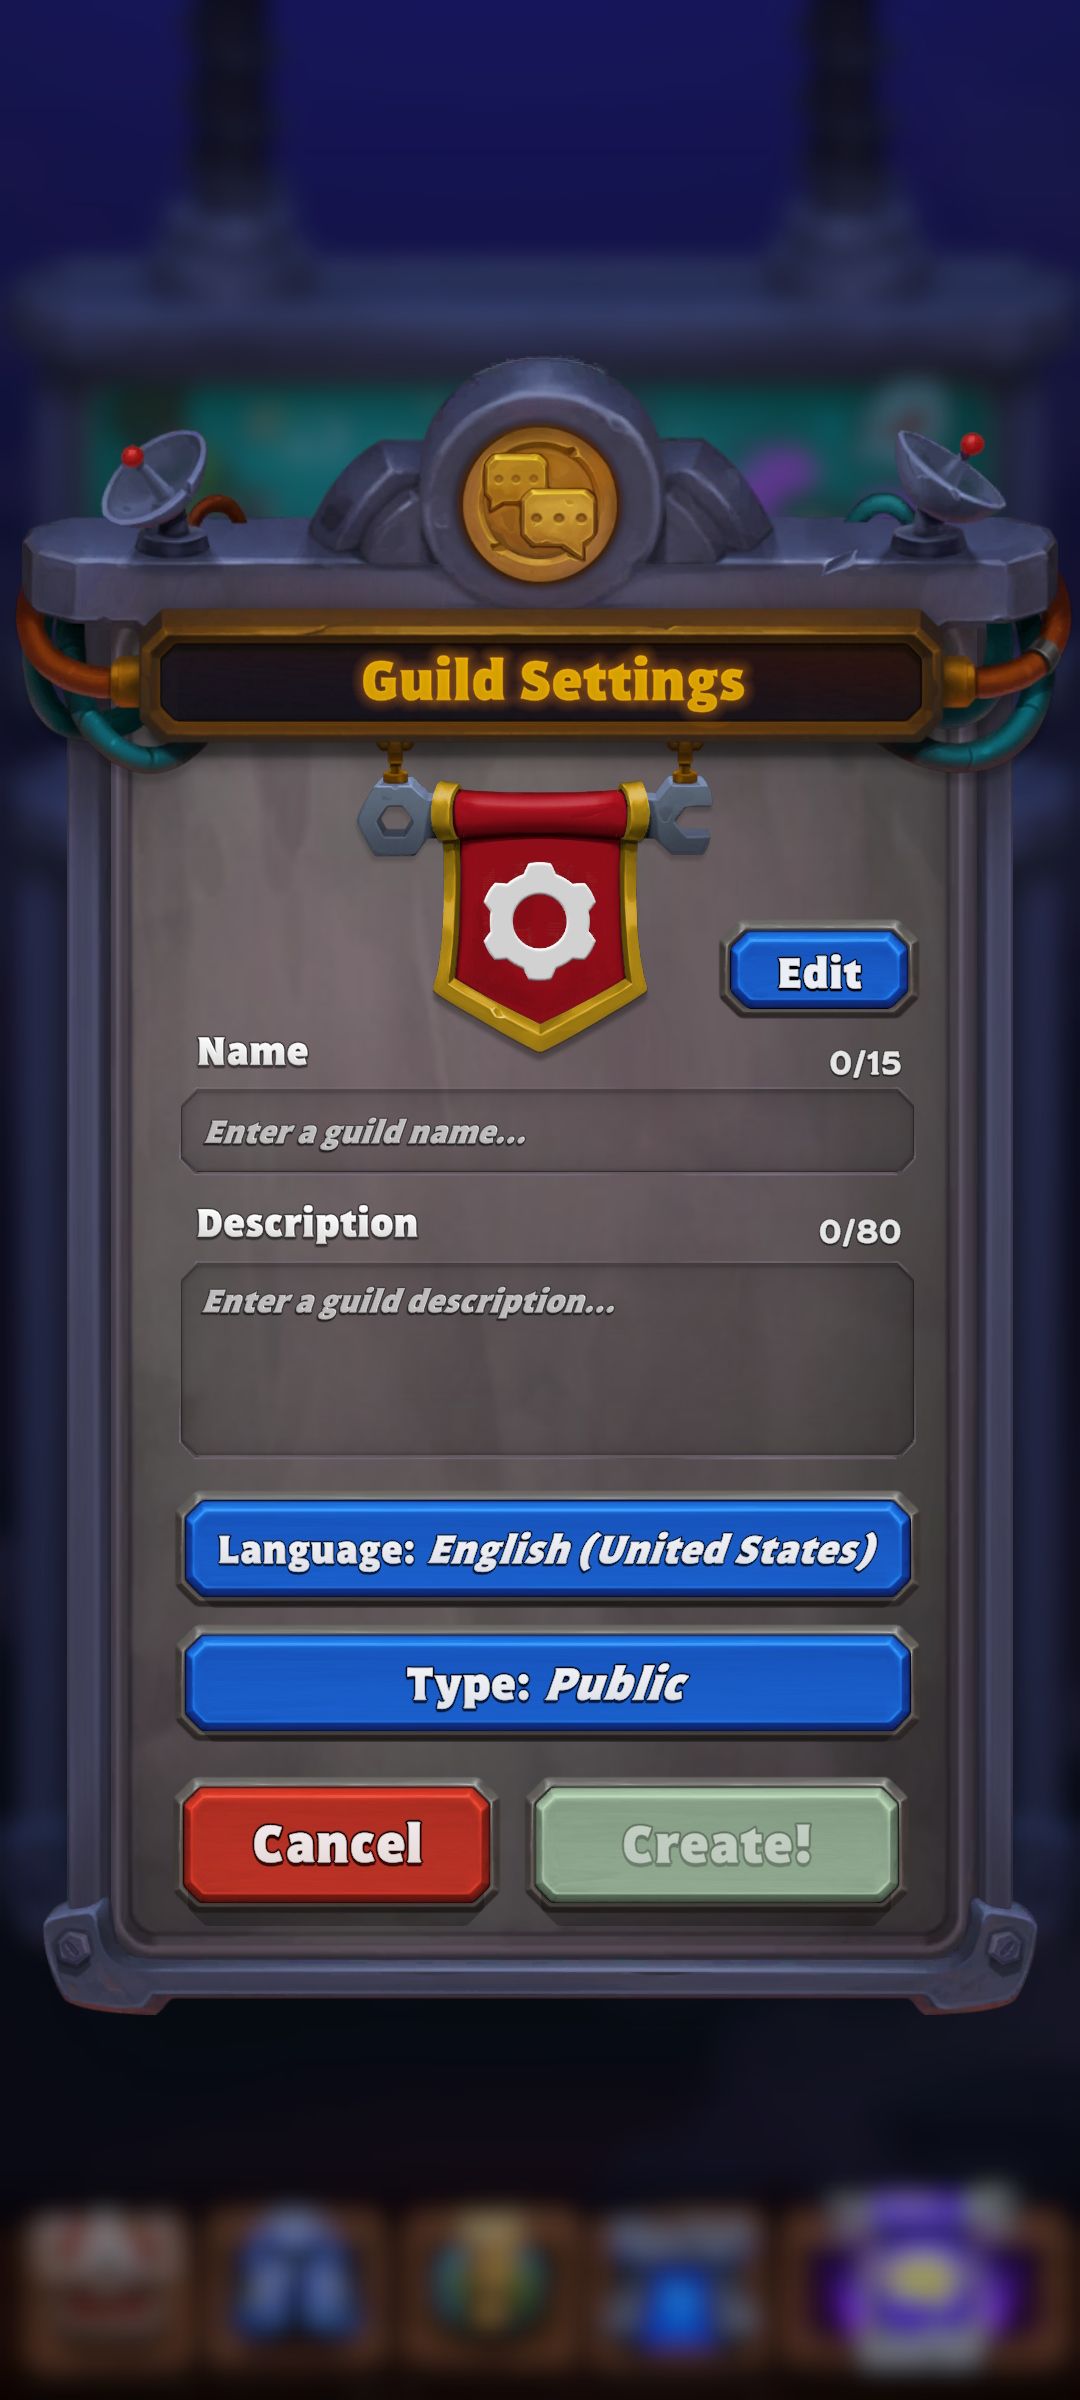 guild setting creation screen in social